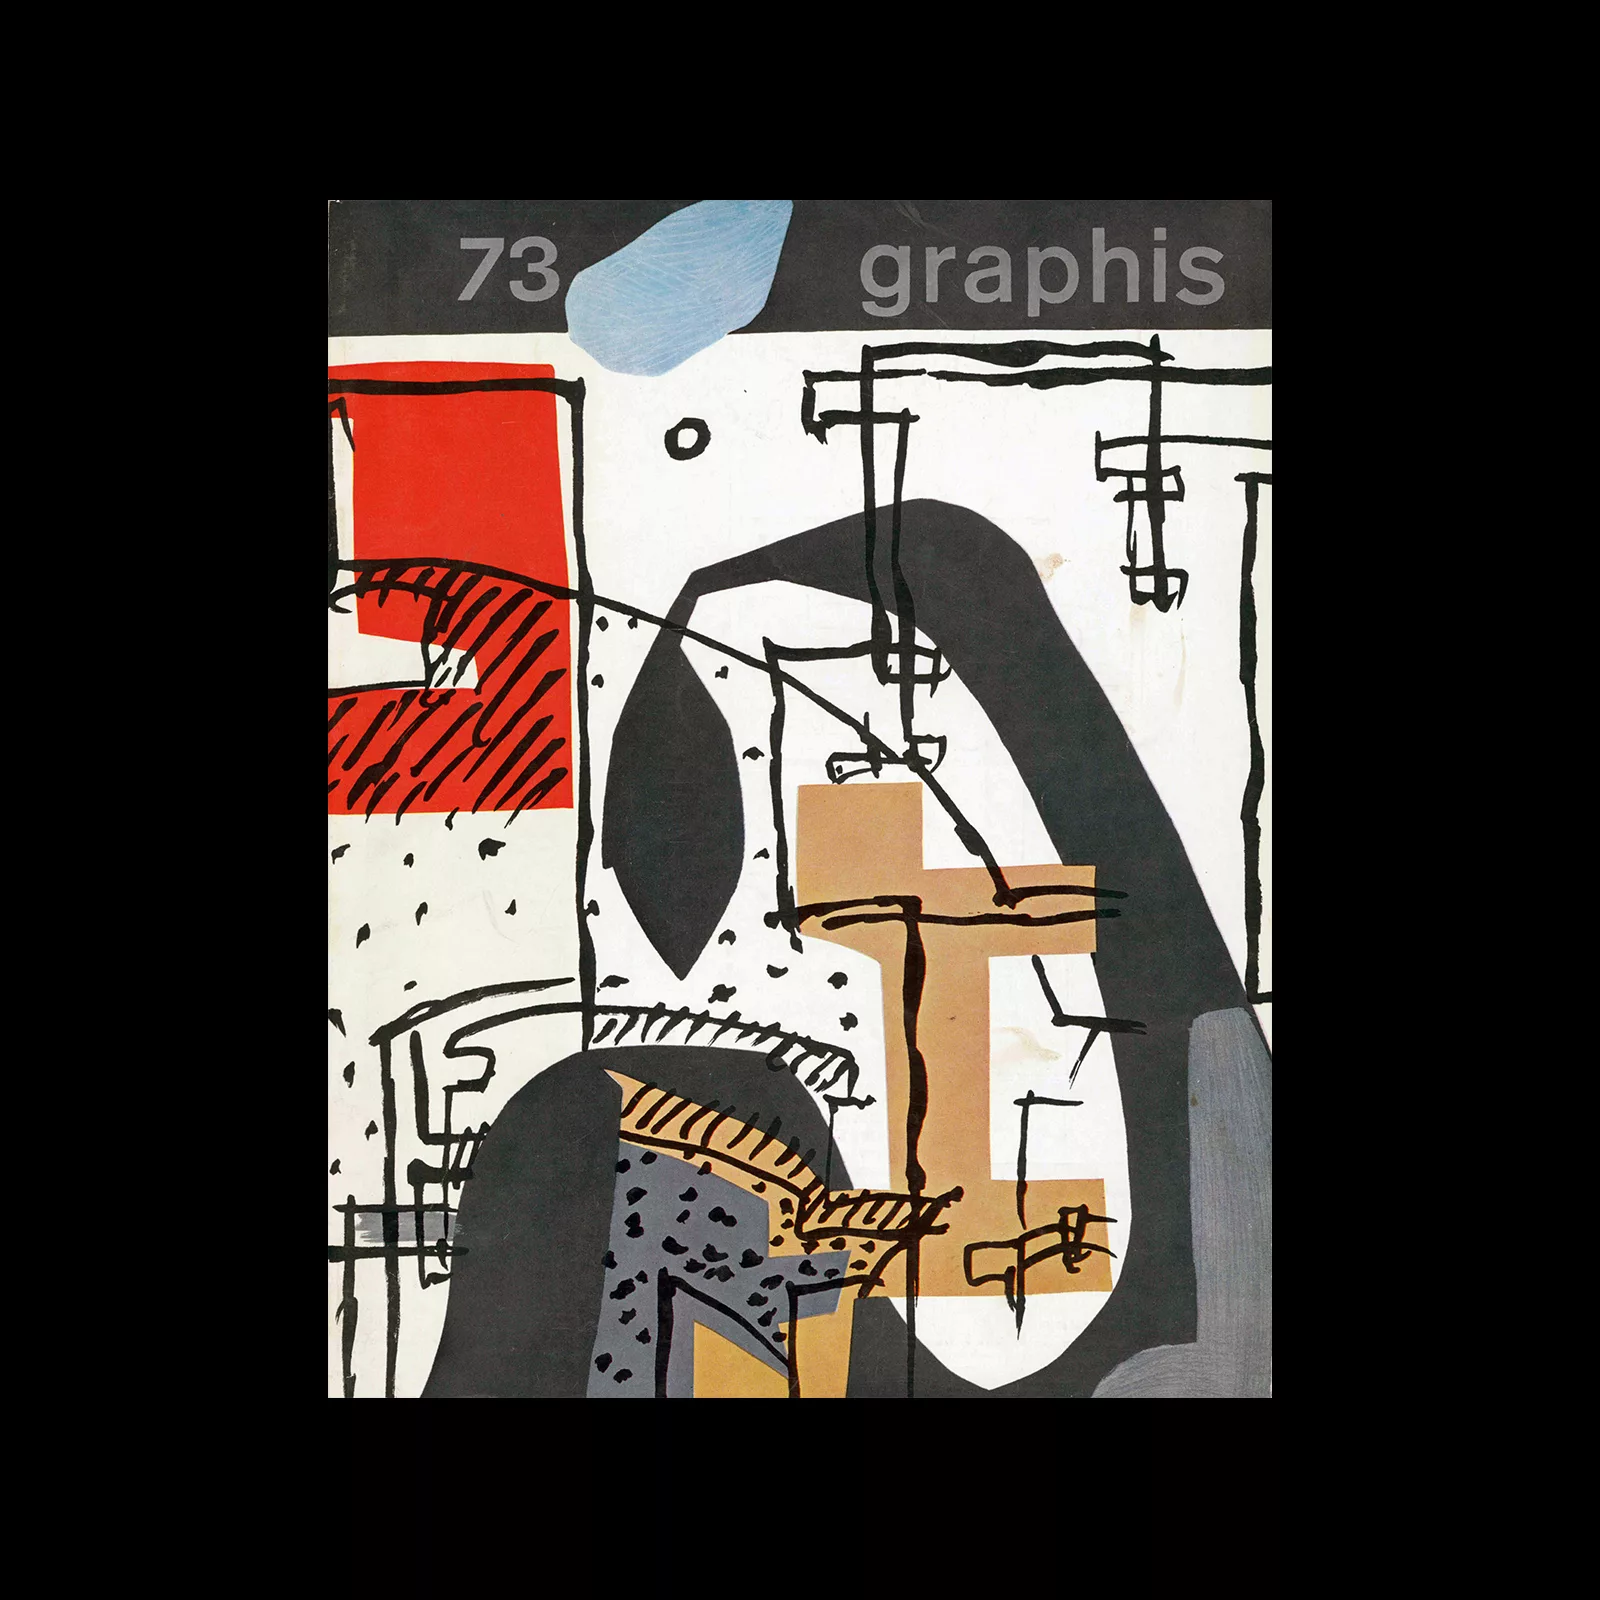 Graphis 73, 1957. Cover design by Le Corbusier.